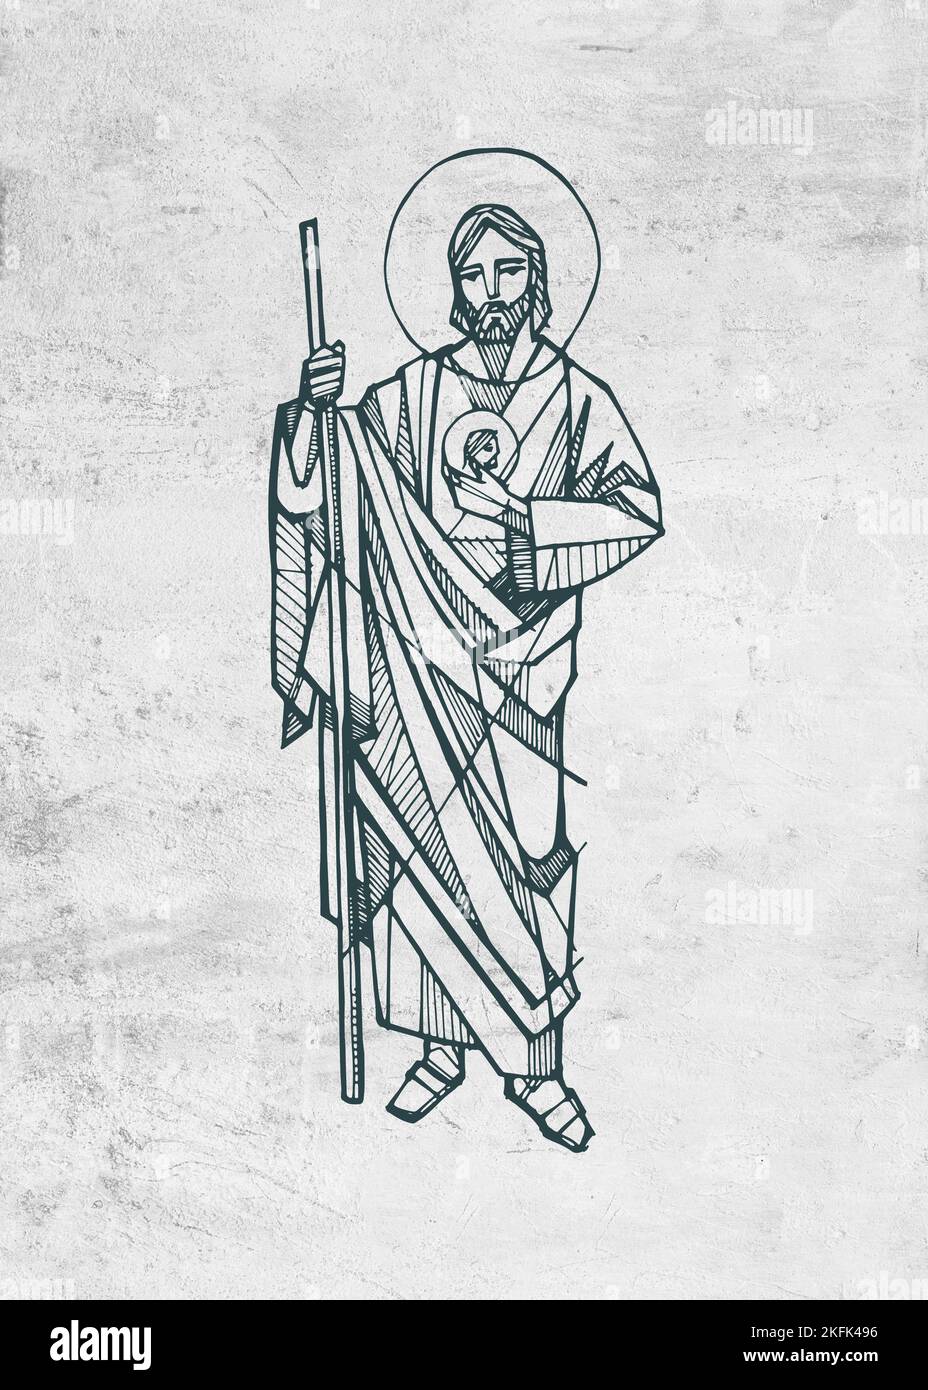 Hand drawn illustration or drawing of St Jude Thaddeus Stock Photo